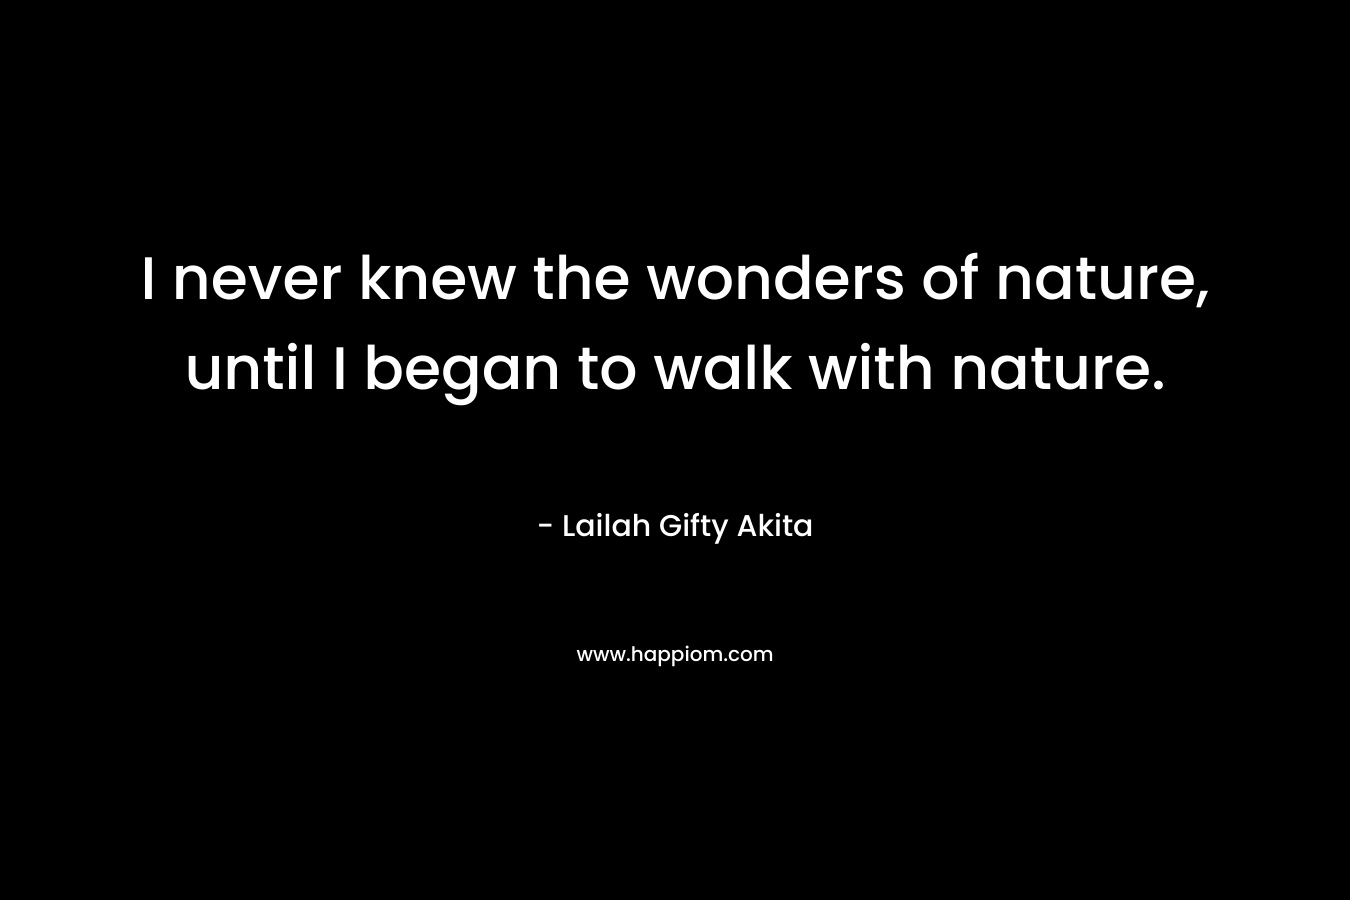 I never knew the wonders of nature, until I began to walk with nature.